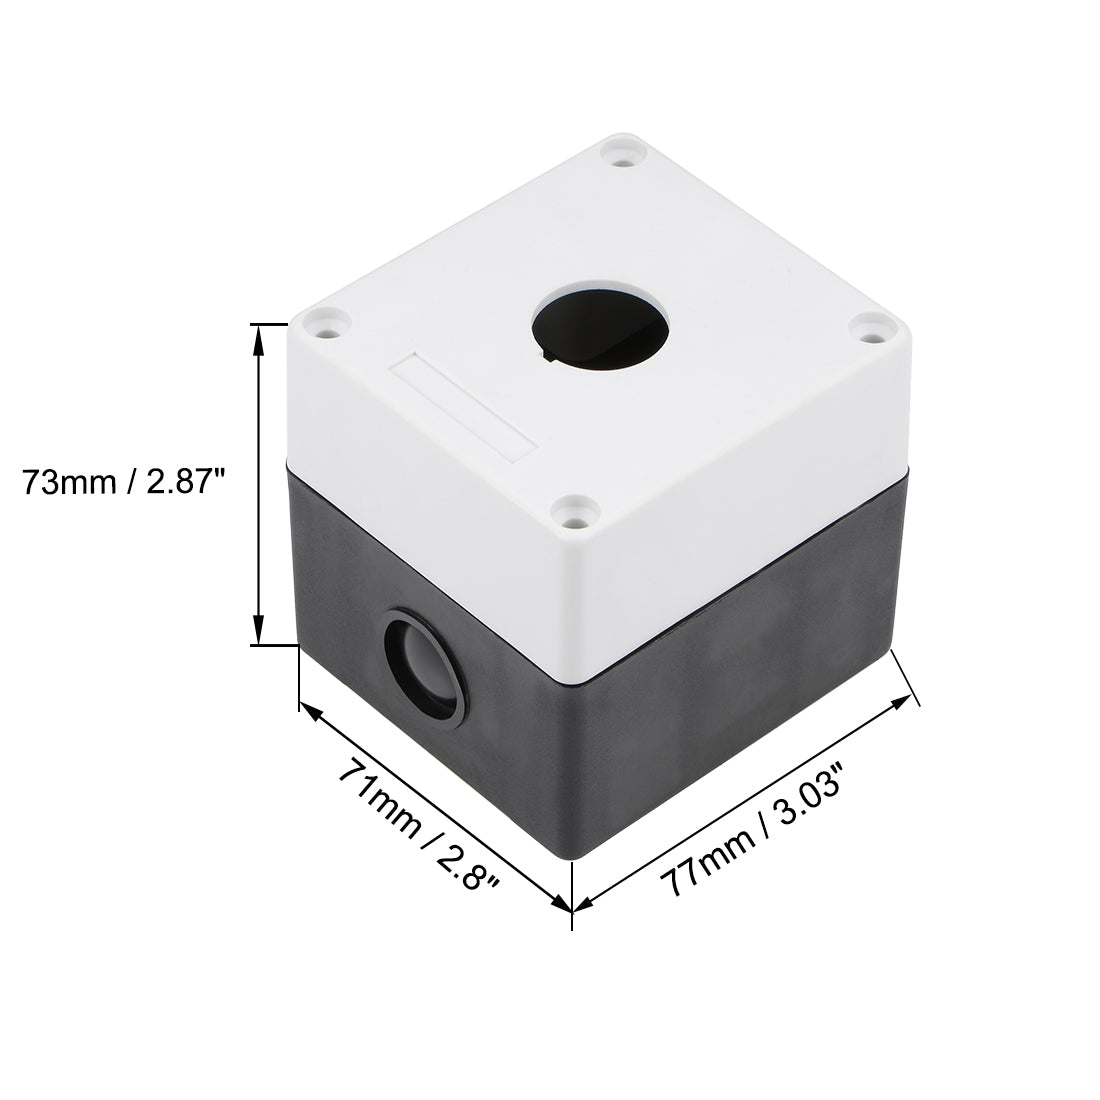 uxcell Uxcell Push Button Switch Control Station Box 22mm 1 Hole Aperture White and Black